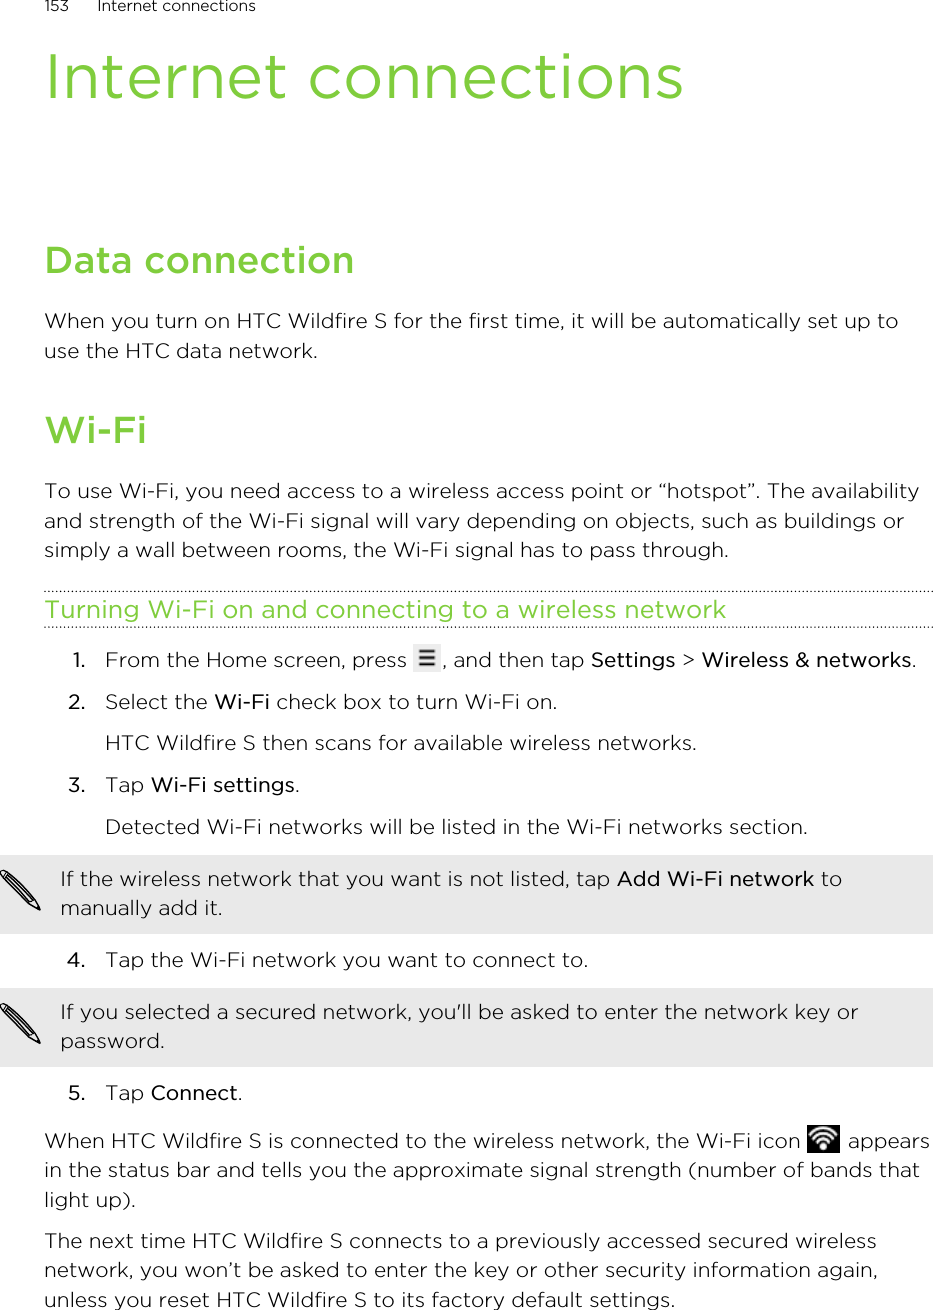 Internet connectionsData connectionWhen you turn on HTC Wildfire S for the first time, it will be automatically set up touse the HTC data network.Wi-FiTo use Wi-Fi, you need access to a wireless access point or “hotspot”. The availabilityand strength of the Wi-Fi signal will vary depending on objects, such as buildings orsimply a wall between rooms, the Wi-Fi signal has to pass through.Turning Wi-Fi on and connecting to a wireless network1. From the Home screen, press  , and then tap Settings &gt; Wireless &amp; networks.2. Select the Wi-Fi check box to turn Wi-Fi on. HTC Wildfire S then scans for available wireless networks.3. Tap Wi-Fi settings. Detected Wi-Fi networks will be listed in the Wi-Fi networks section.If the wireless network that you want is not listed, tap Add Wi-Fi network tomanually add it.4. Tap the Wi-Fi network you want to connect to. If you selected a secured network, you&apos;ll be asked to enter the network key orpassword.5. Tap Connect.When HTC Wildfire S is connected to the wireless network, the Wi-Fi icon   appearsin the status bar and tells you the approximate signal strength (number of bands thatlight up).The next time HTC Wildfire S connects to a previously accessed secured wirelessnetwork, you won’t be asked to enter the key or other security information again,unless you reset HTC Wildfire S to its factory default settings.153 Internet connections